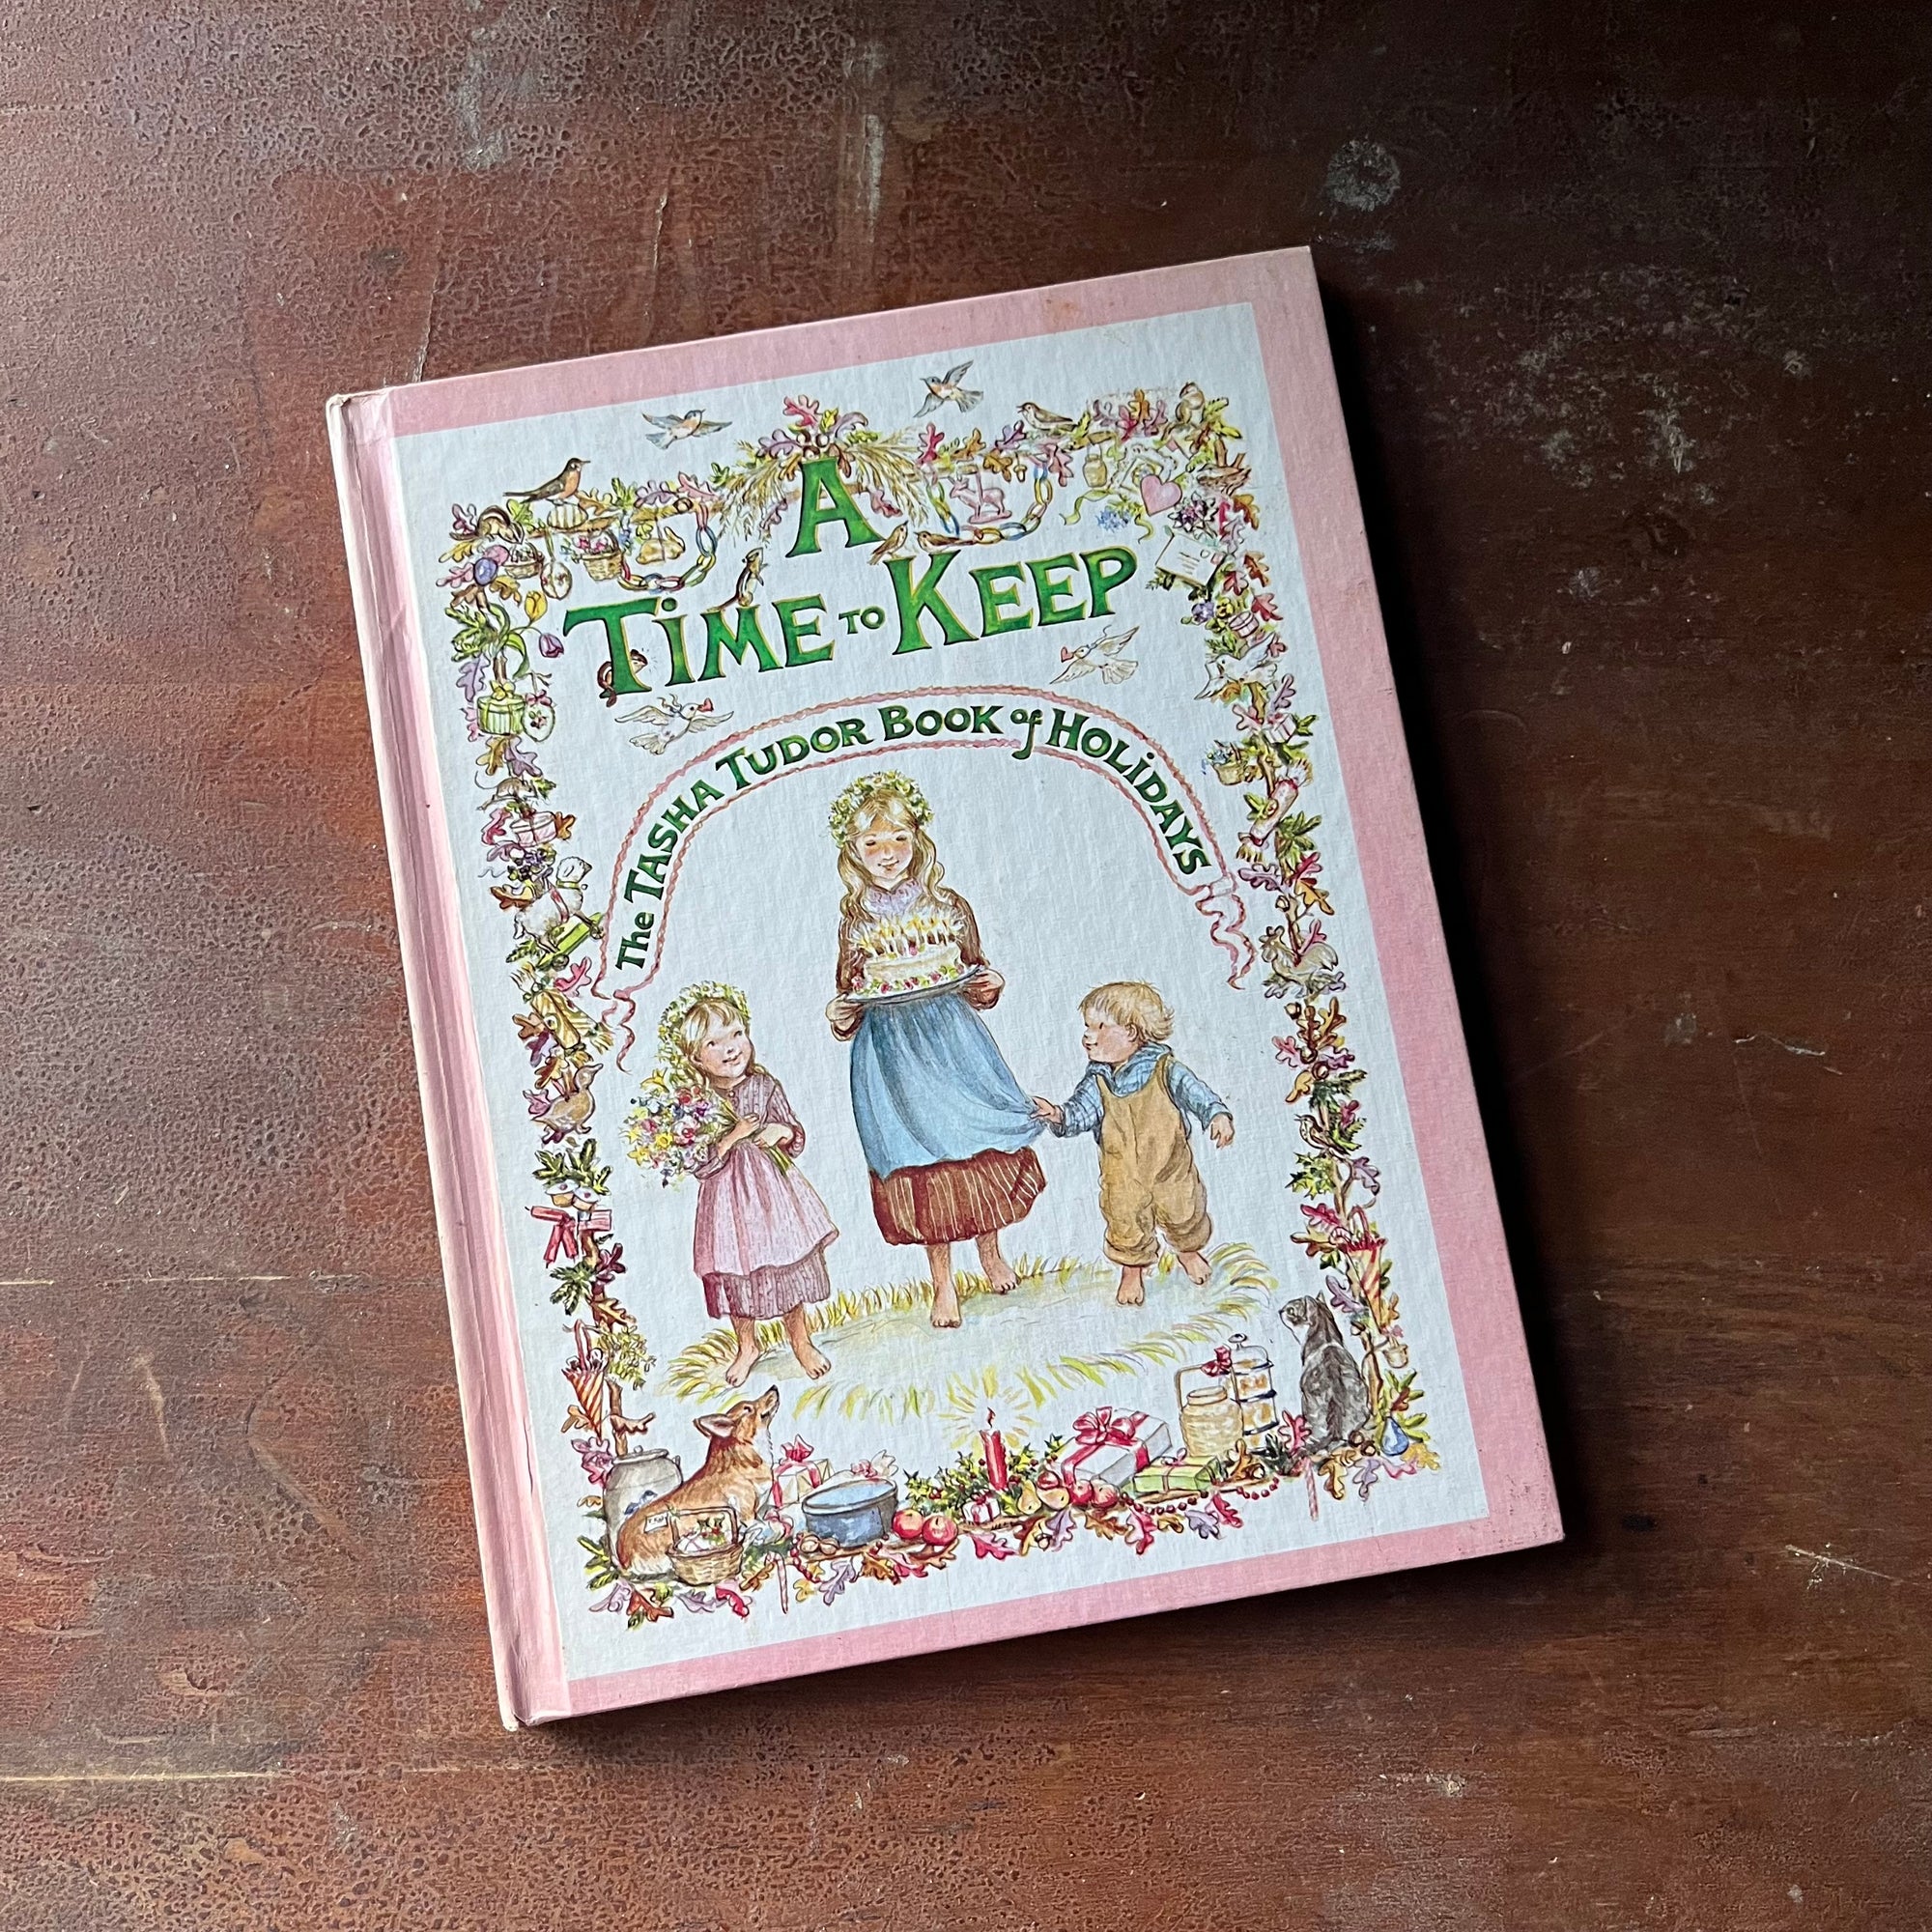 vintage children's picture book - A Time to Keep The Tasha Tudor Book of Holidays written and illustrated by Tasha Tudor - view of the front cover with three children illustrated on it with a border with all kinds of animals tucked into it